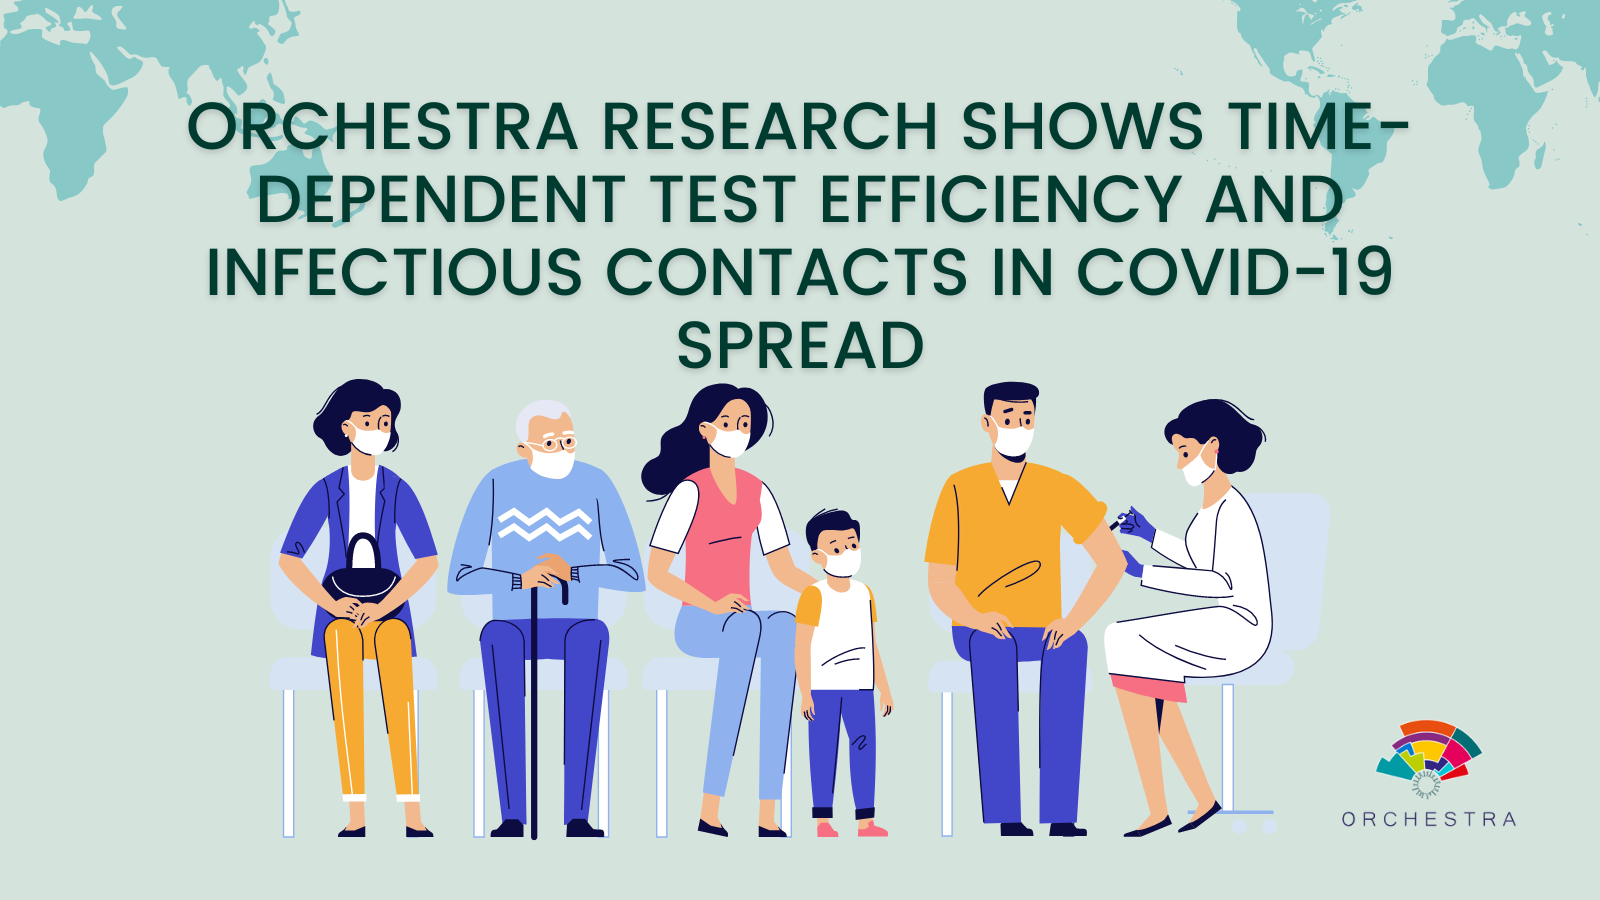 ORCHESTRA research shows time-dependent test efficiency and infectious contacts in COVID-19 spread